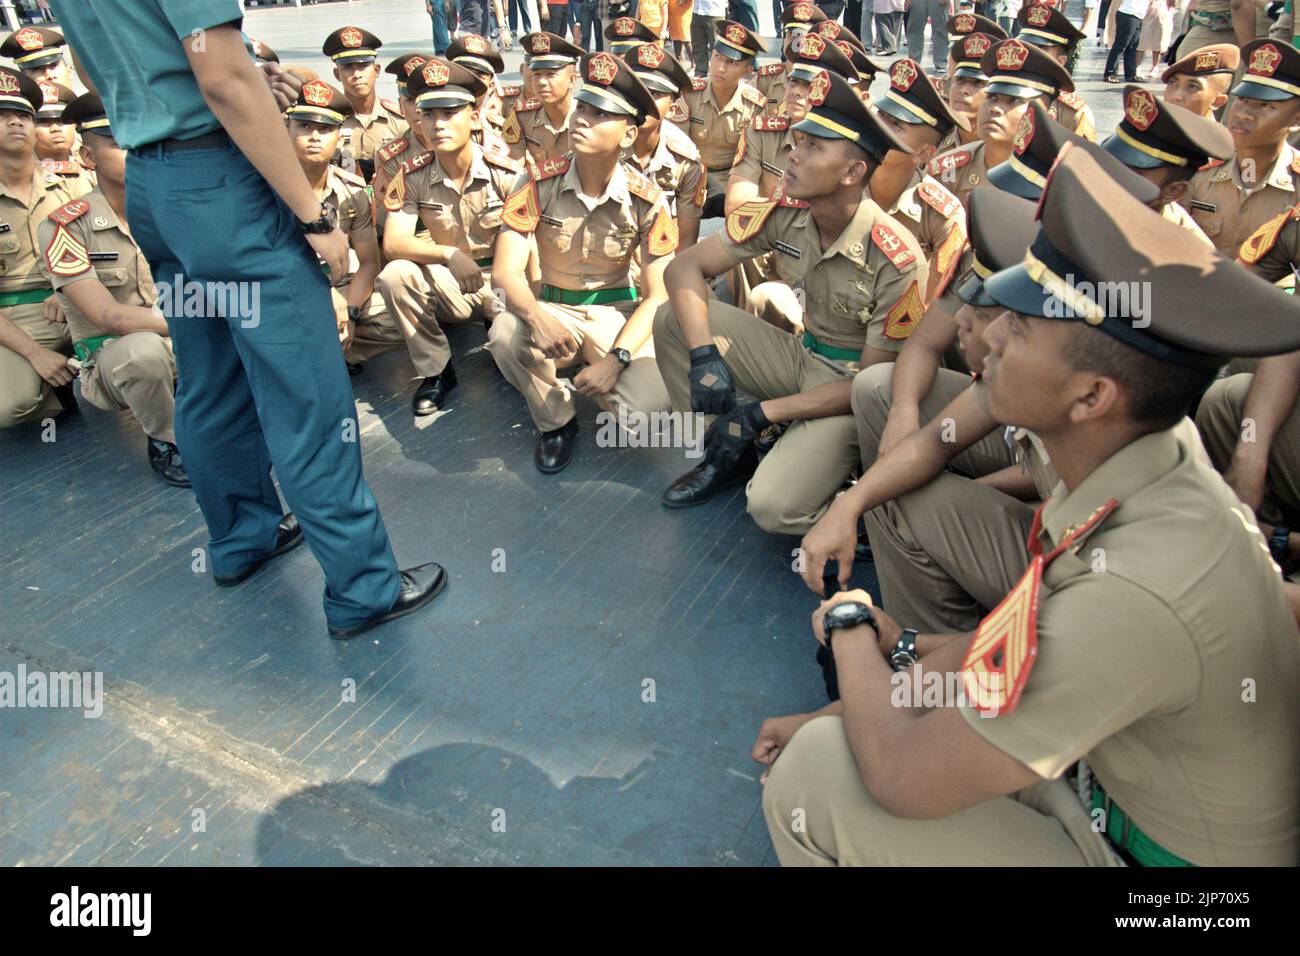 Indonesian navy cadets and officers attending a briefing, as KRI Dewaruci (Dewa Ruci), an Indonesian tall ship, is opened for public visitors at Kolinlamil harbour (Navy harbour) in Tanjung Priok, North Jakarta, Jakarta, Indonesia. Stock Photo